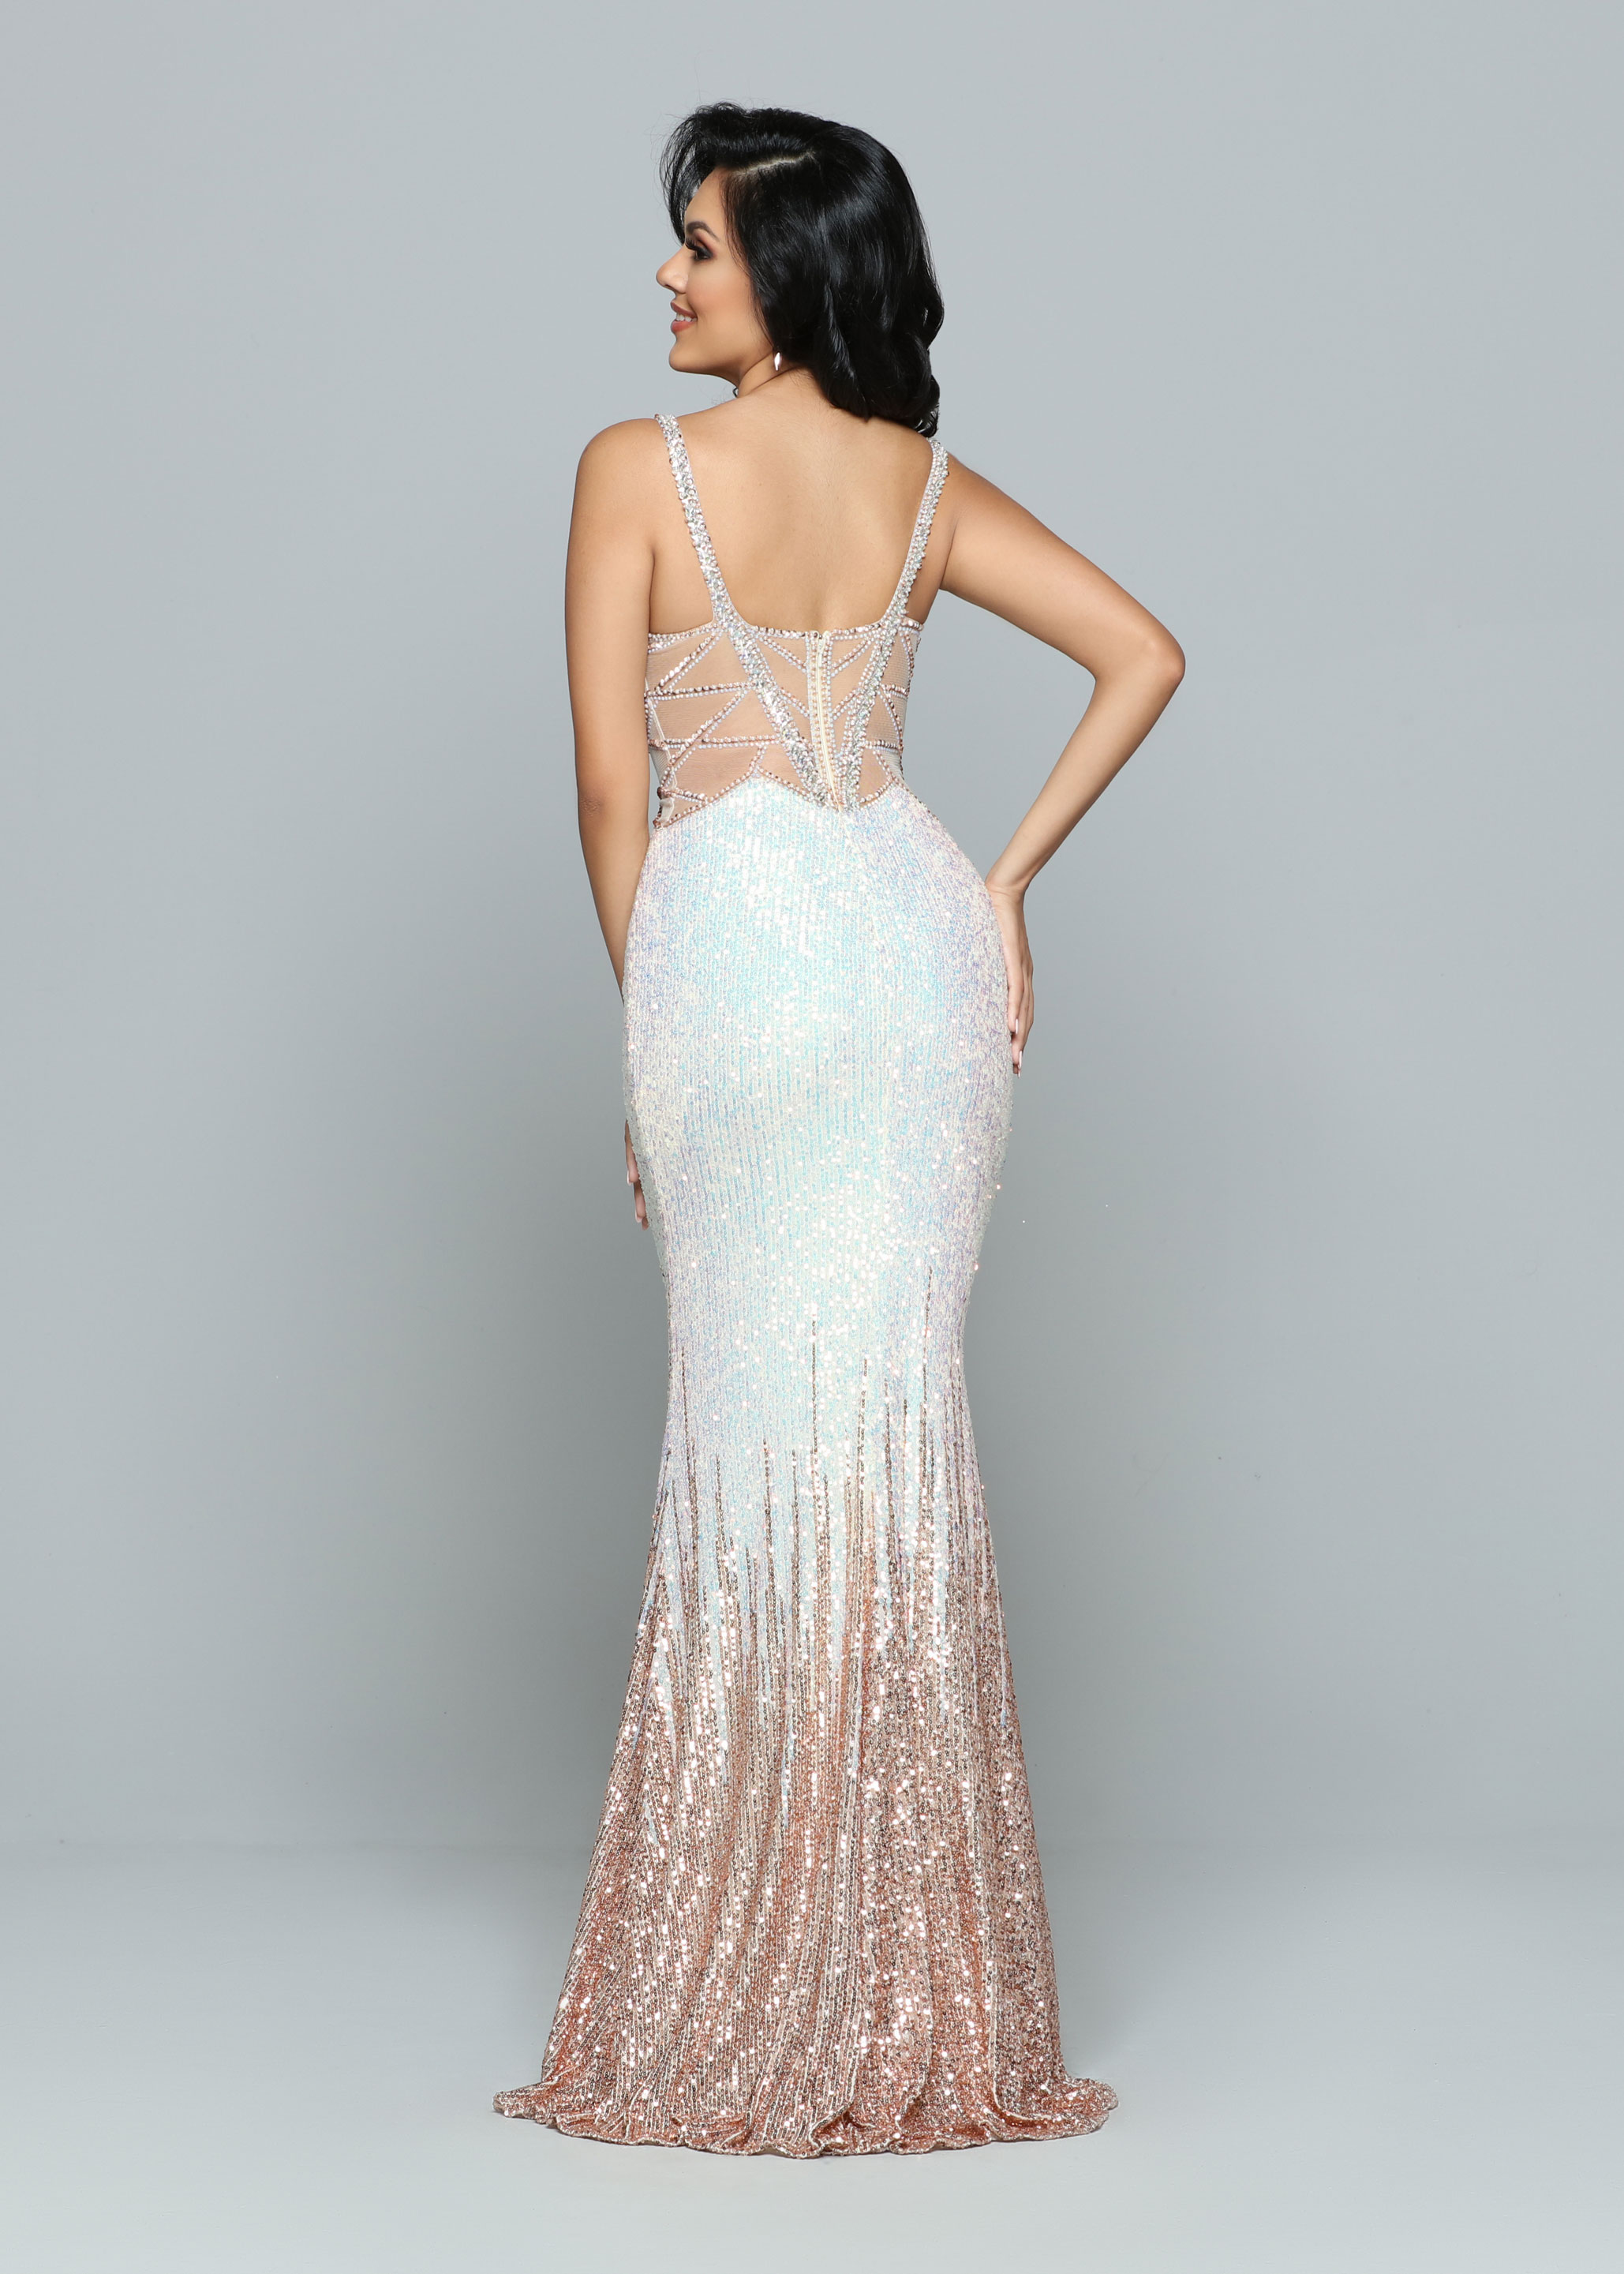 Image showing back view of style #72166